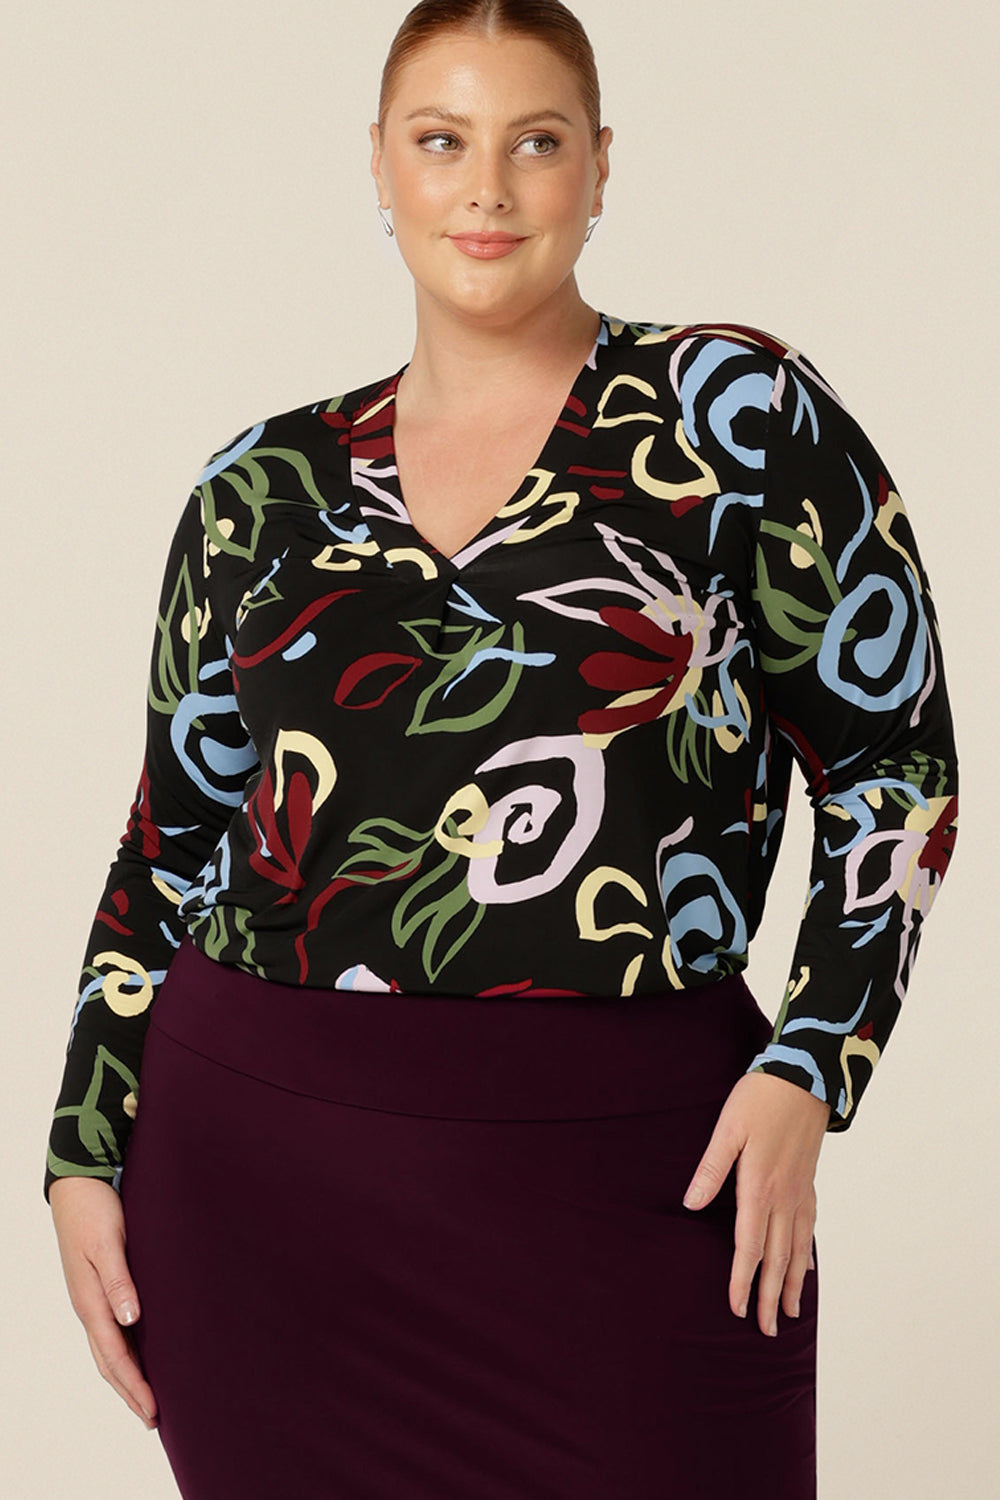 A fuller figure, size 18 woman wears a V-neck jersey top with long sleeves and a shirttail hemline. Australian-made by Australia and New Zealand women's clothing label, L&F, this long sleeve top features a black base abstract print.